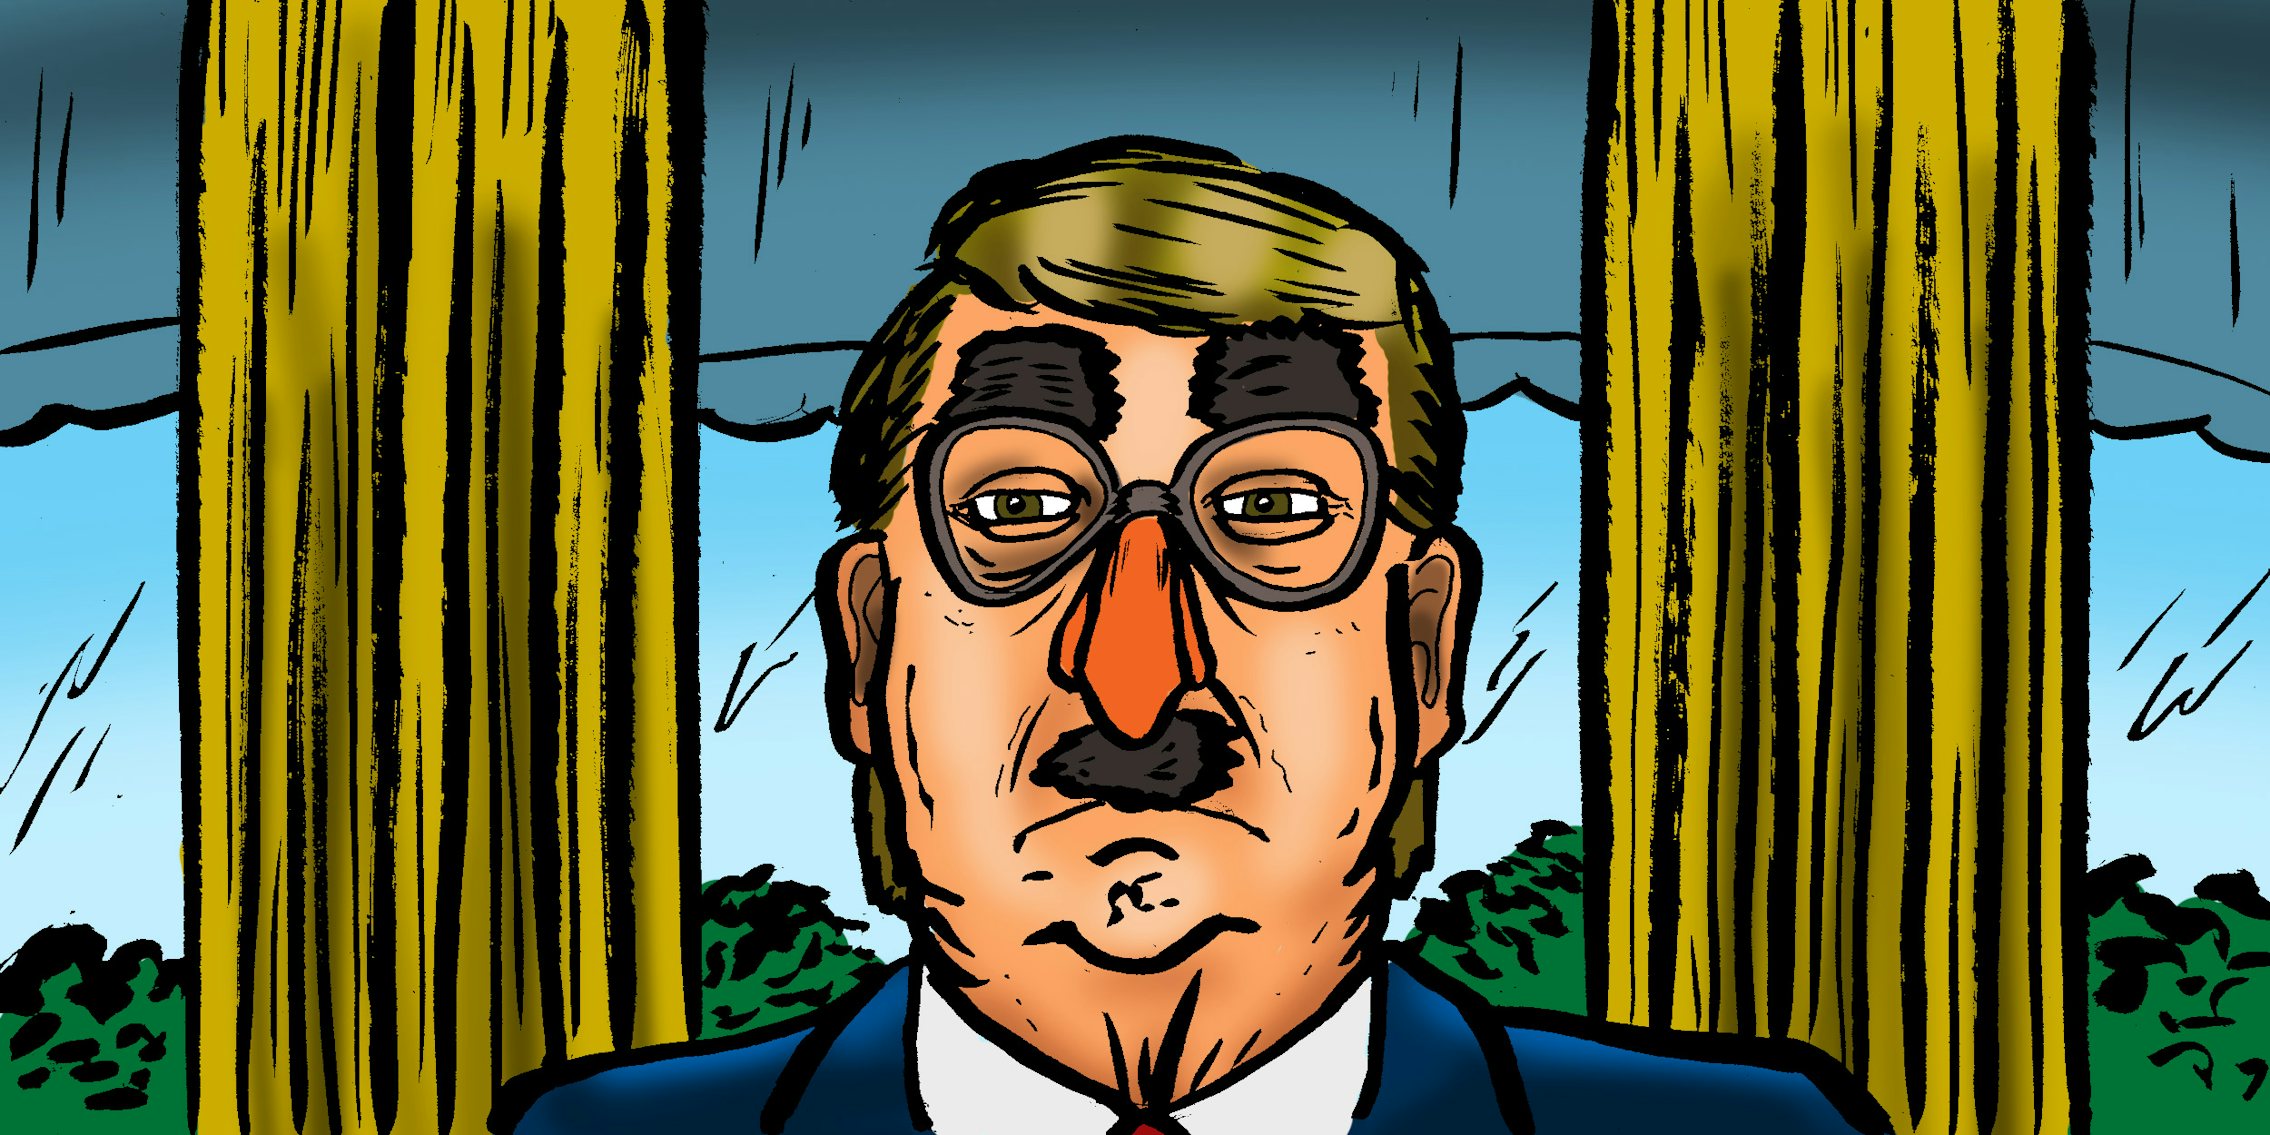 Illustration of Donald Trump wearing a bad disguise